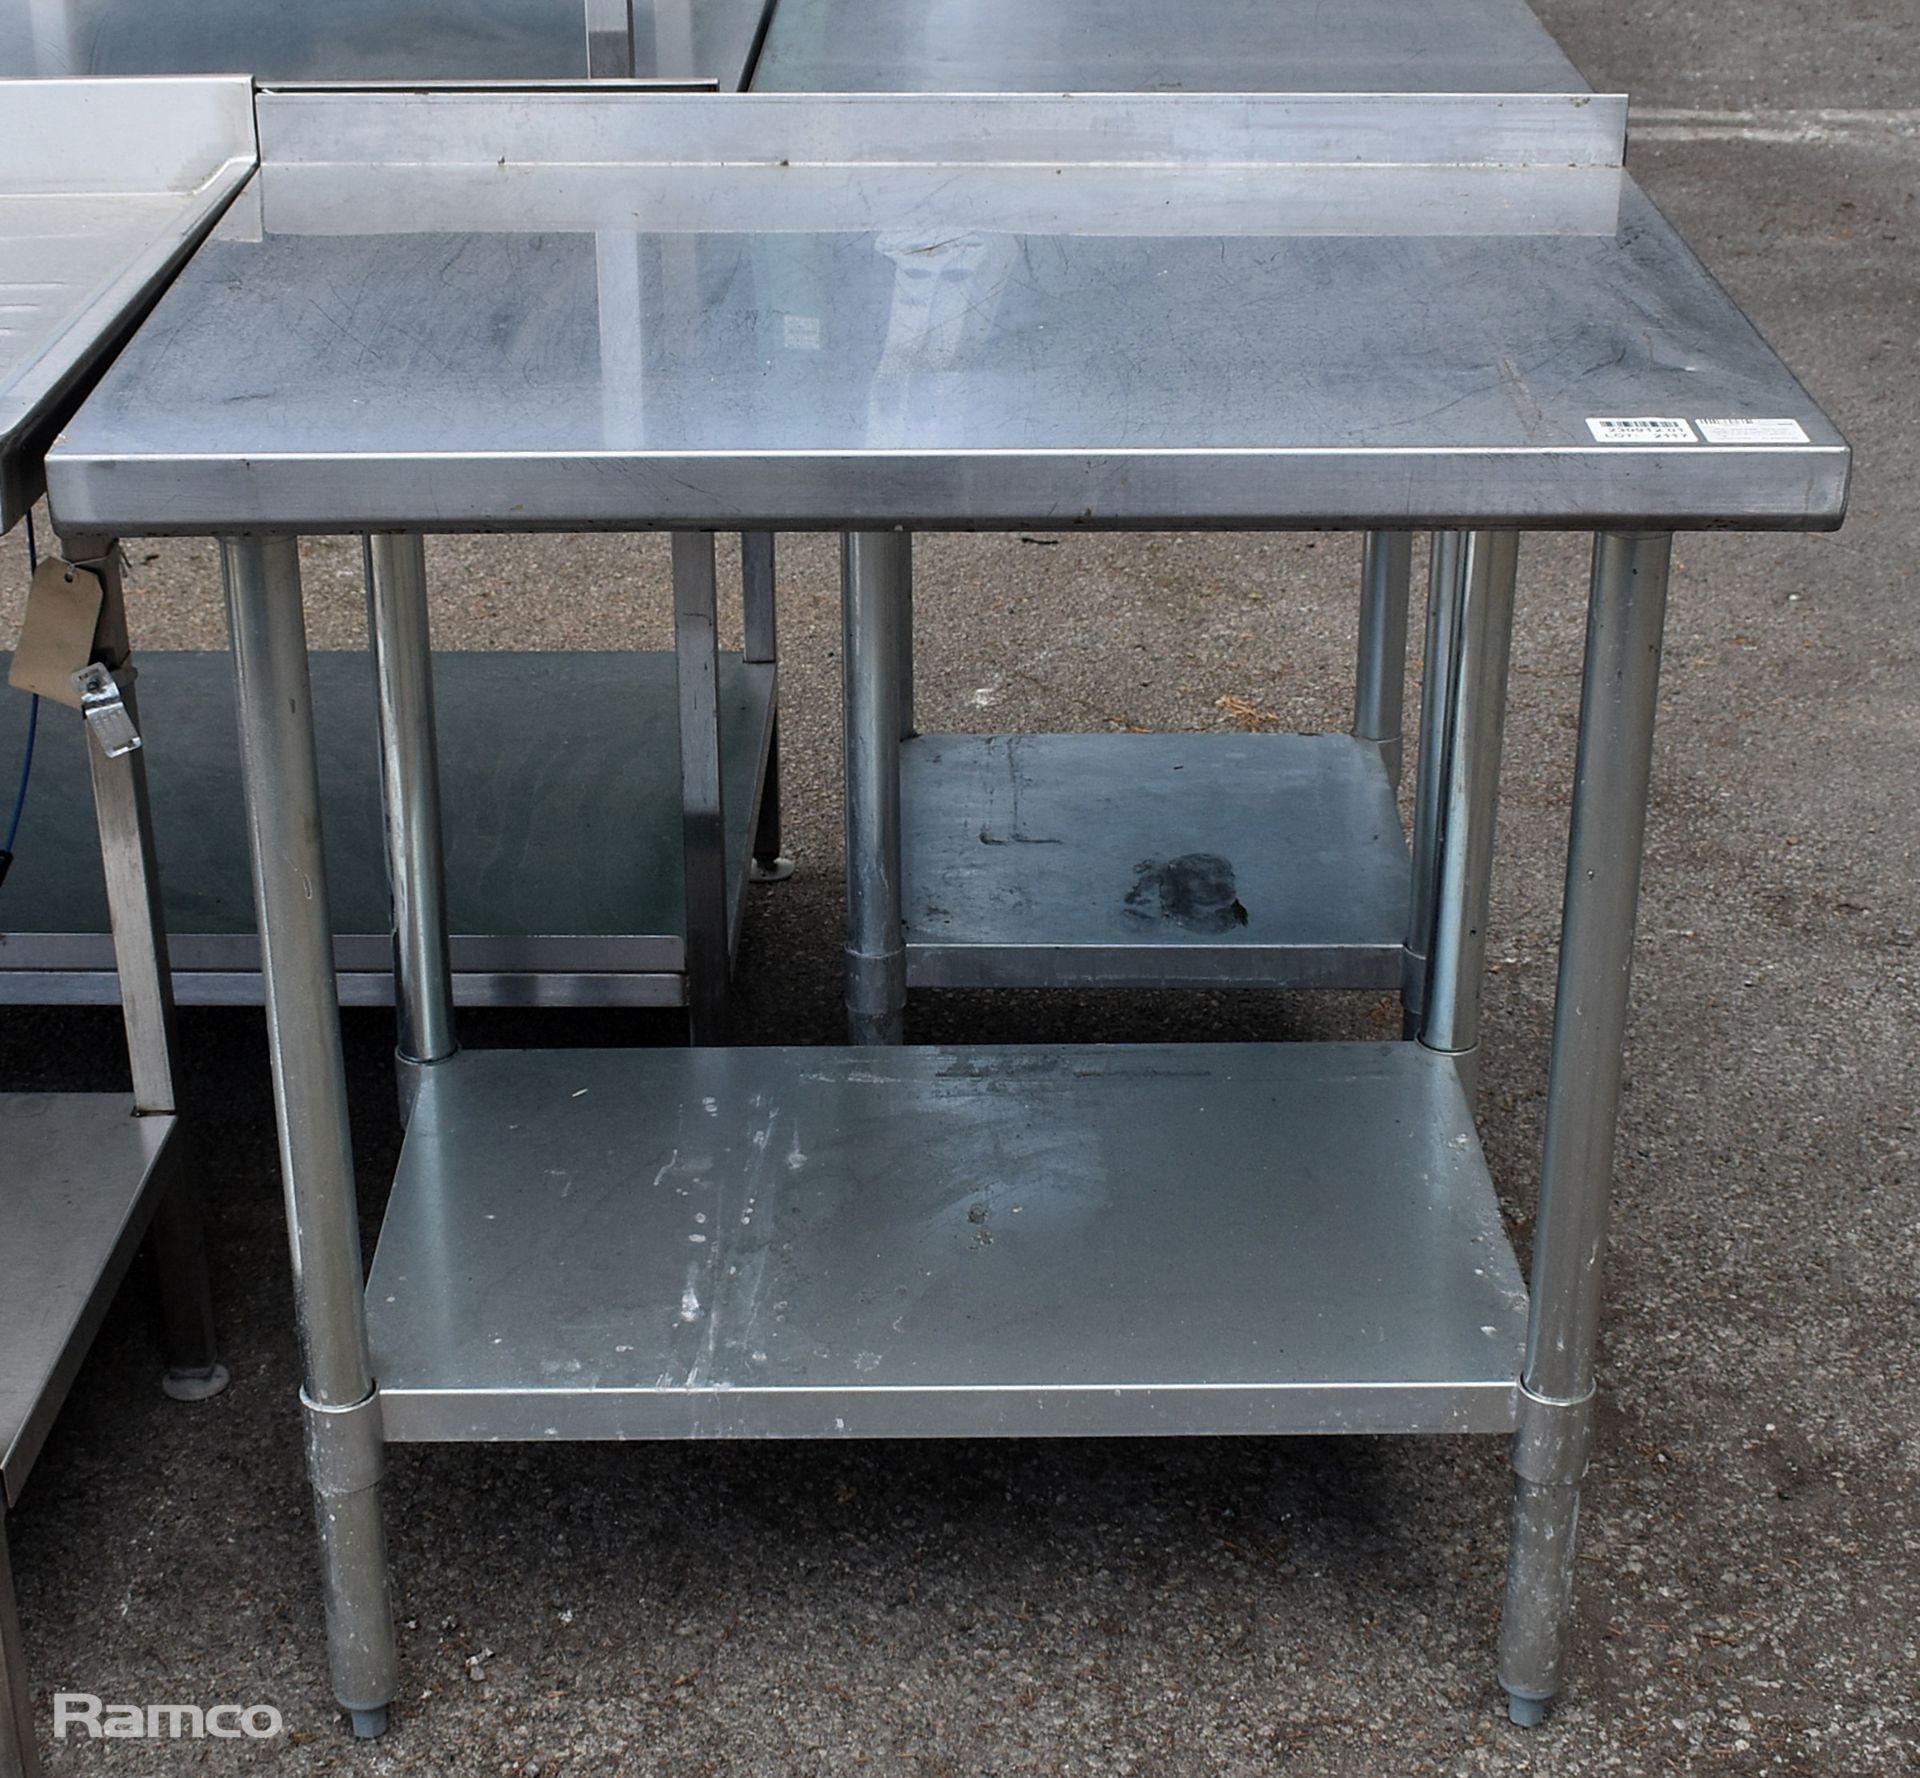 Stainless steel table with upstand and bottom shelf - L 915 x W 610 x H 930mm